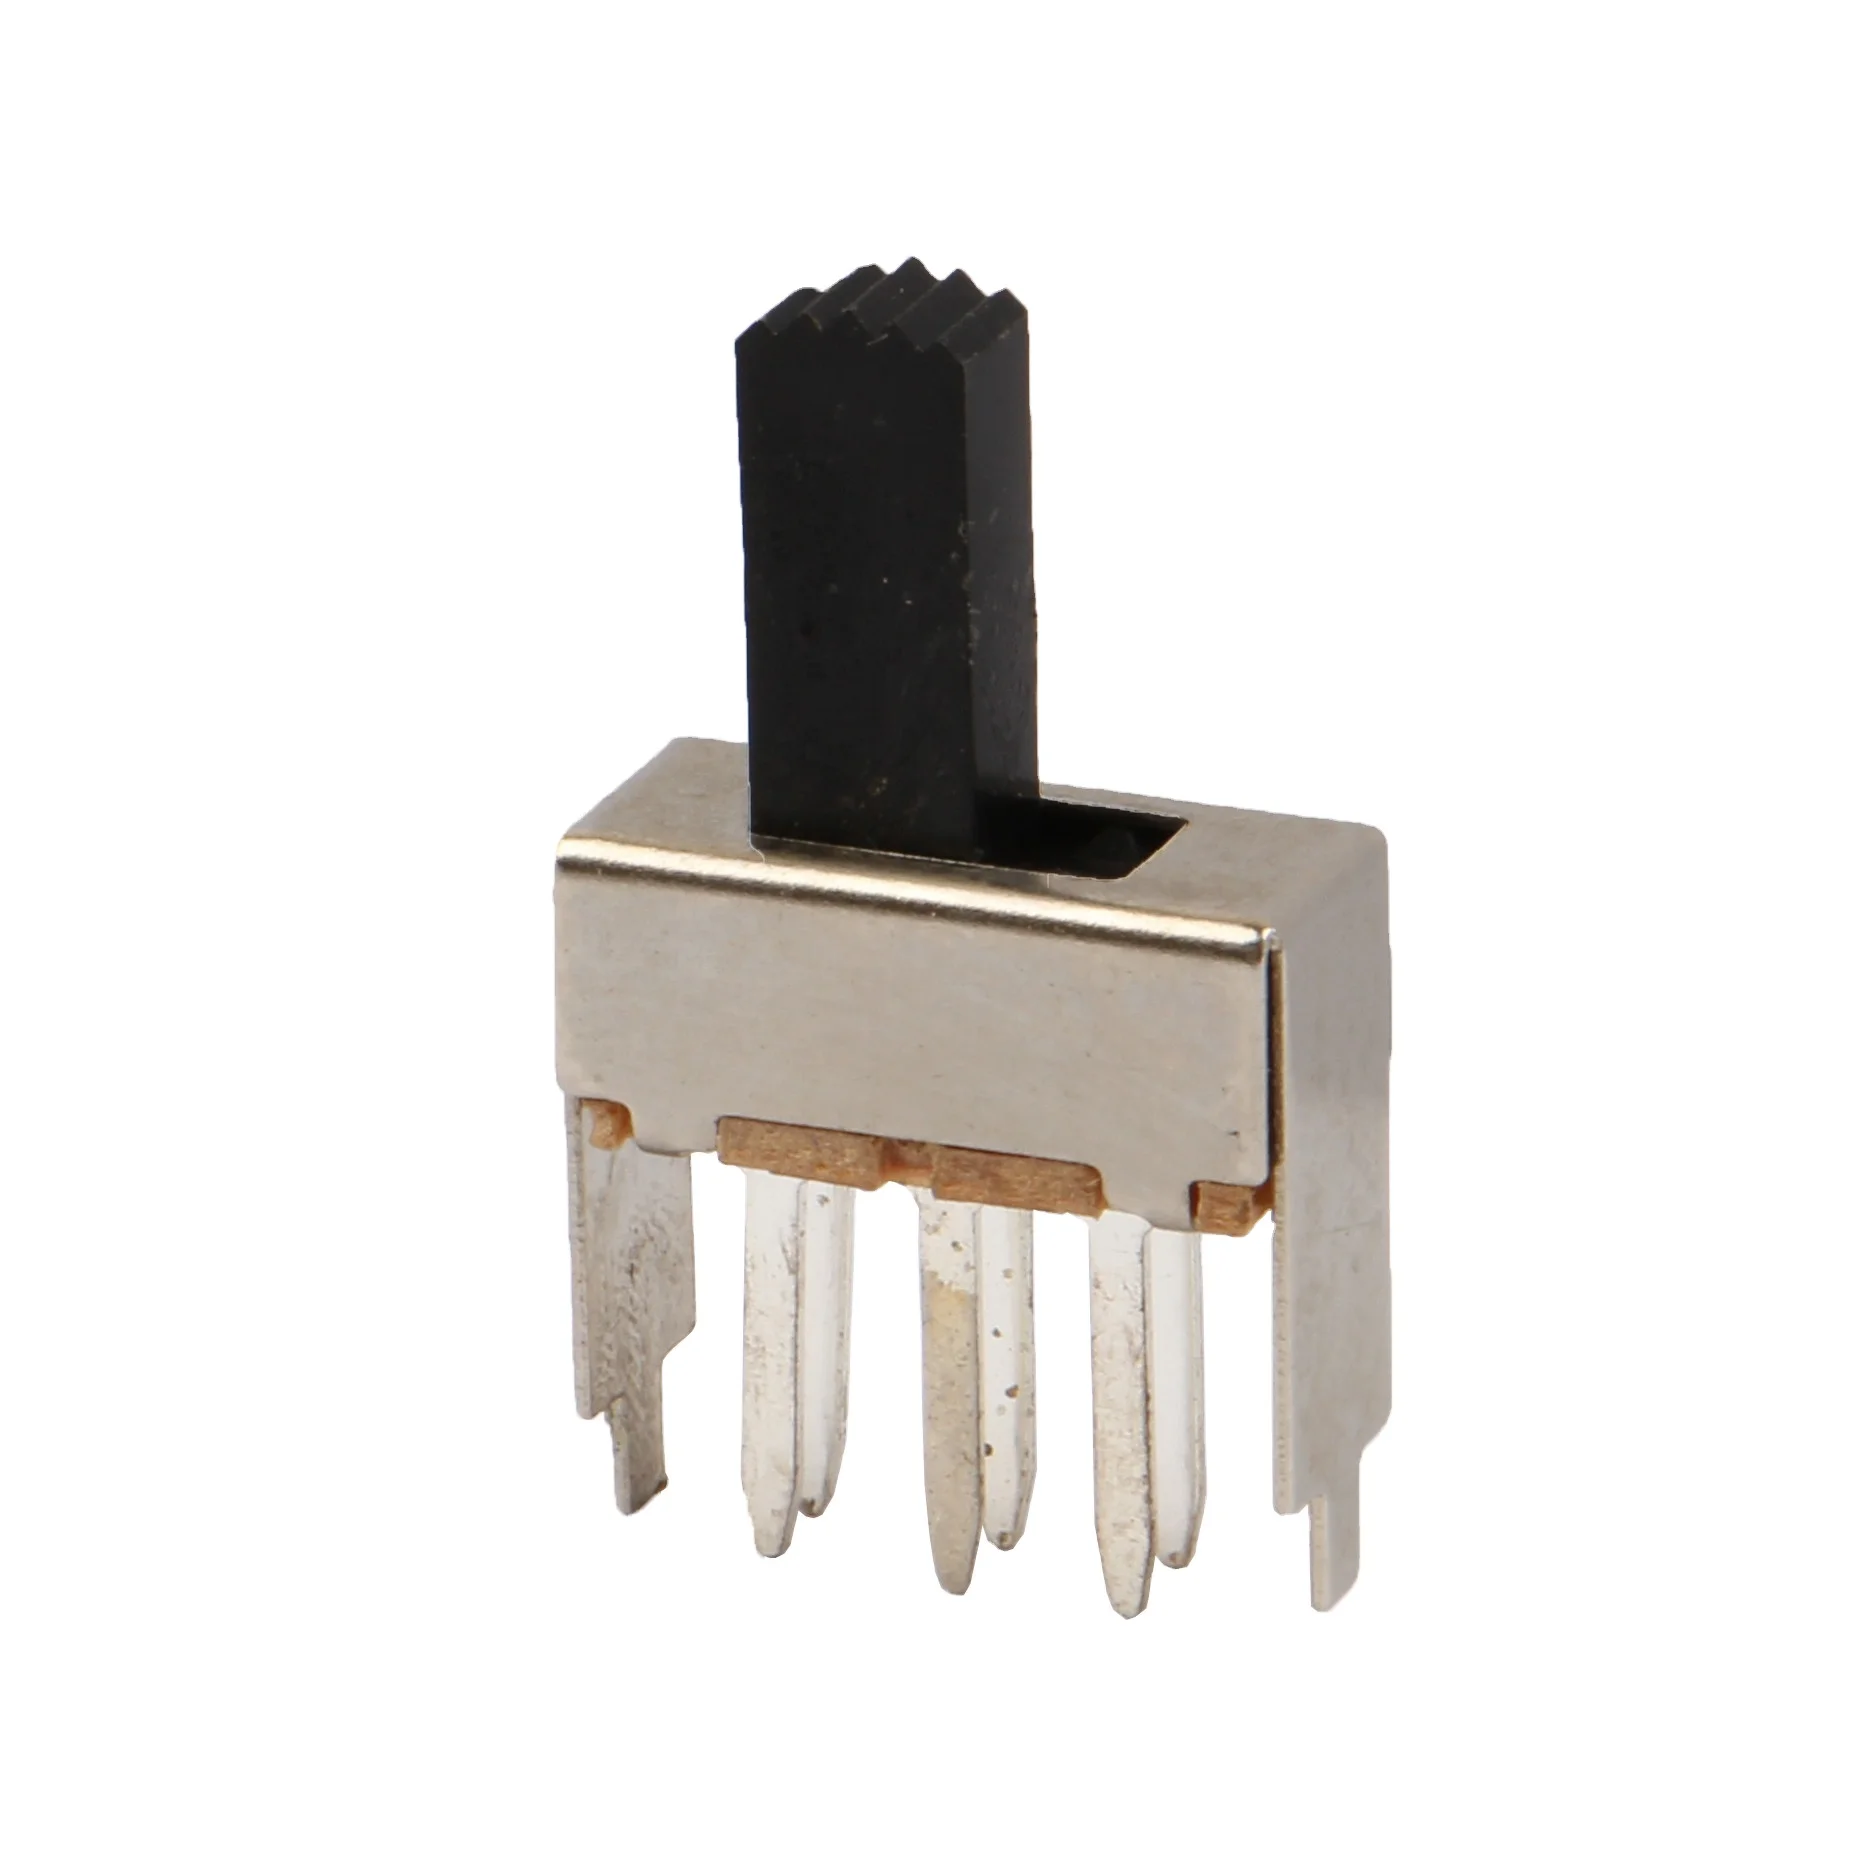 SS 22F17 2P2T DPDT 2 Position Slide Switch 6 Solder Tab Pins Vertical with 2 Retaining Pins (1600449017235)